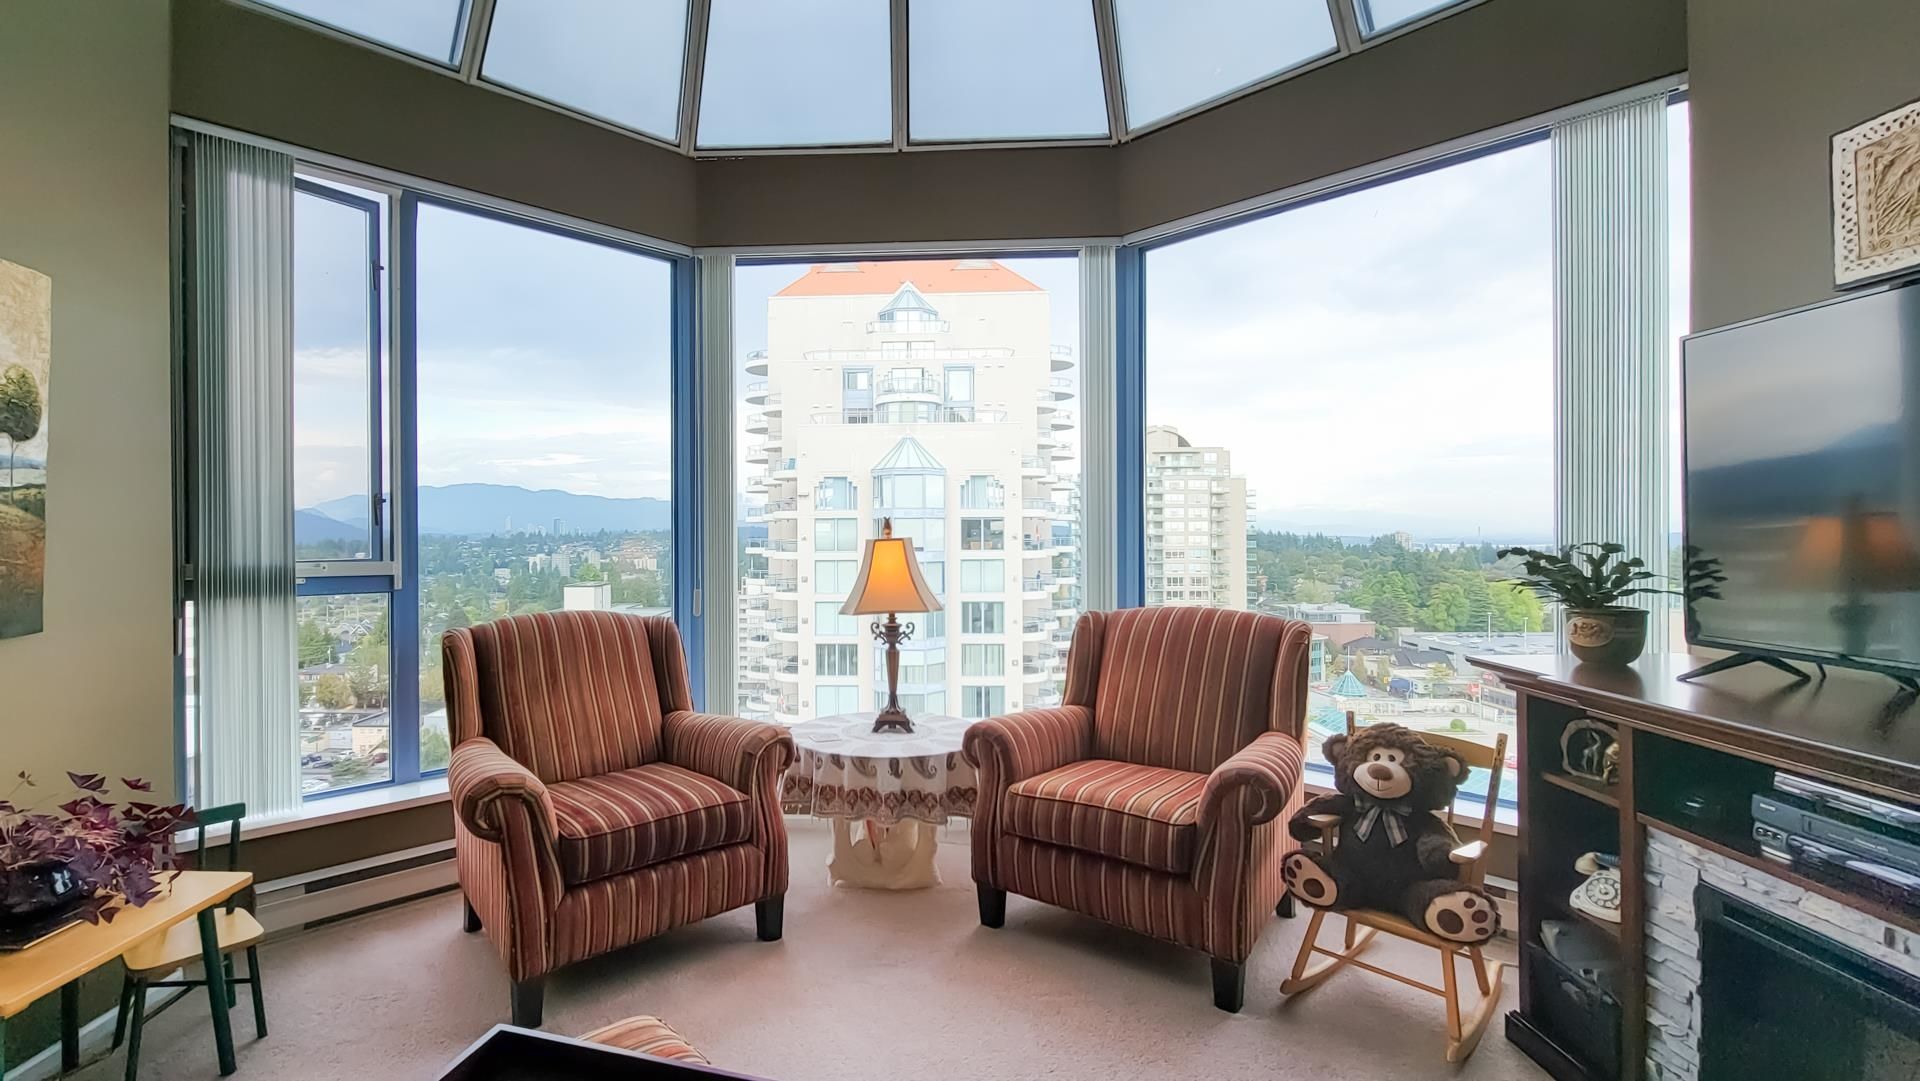 This room is magical with the sweeping views of the North Shore mountains, SFU hill and all the way to the  Golden Ears Mountains.